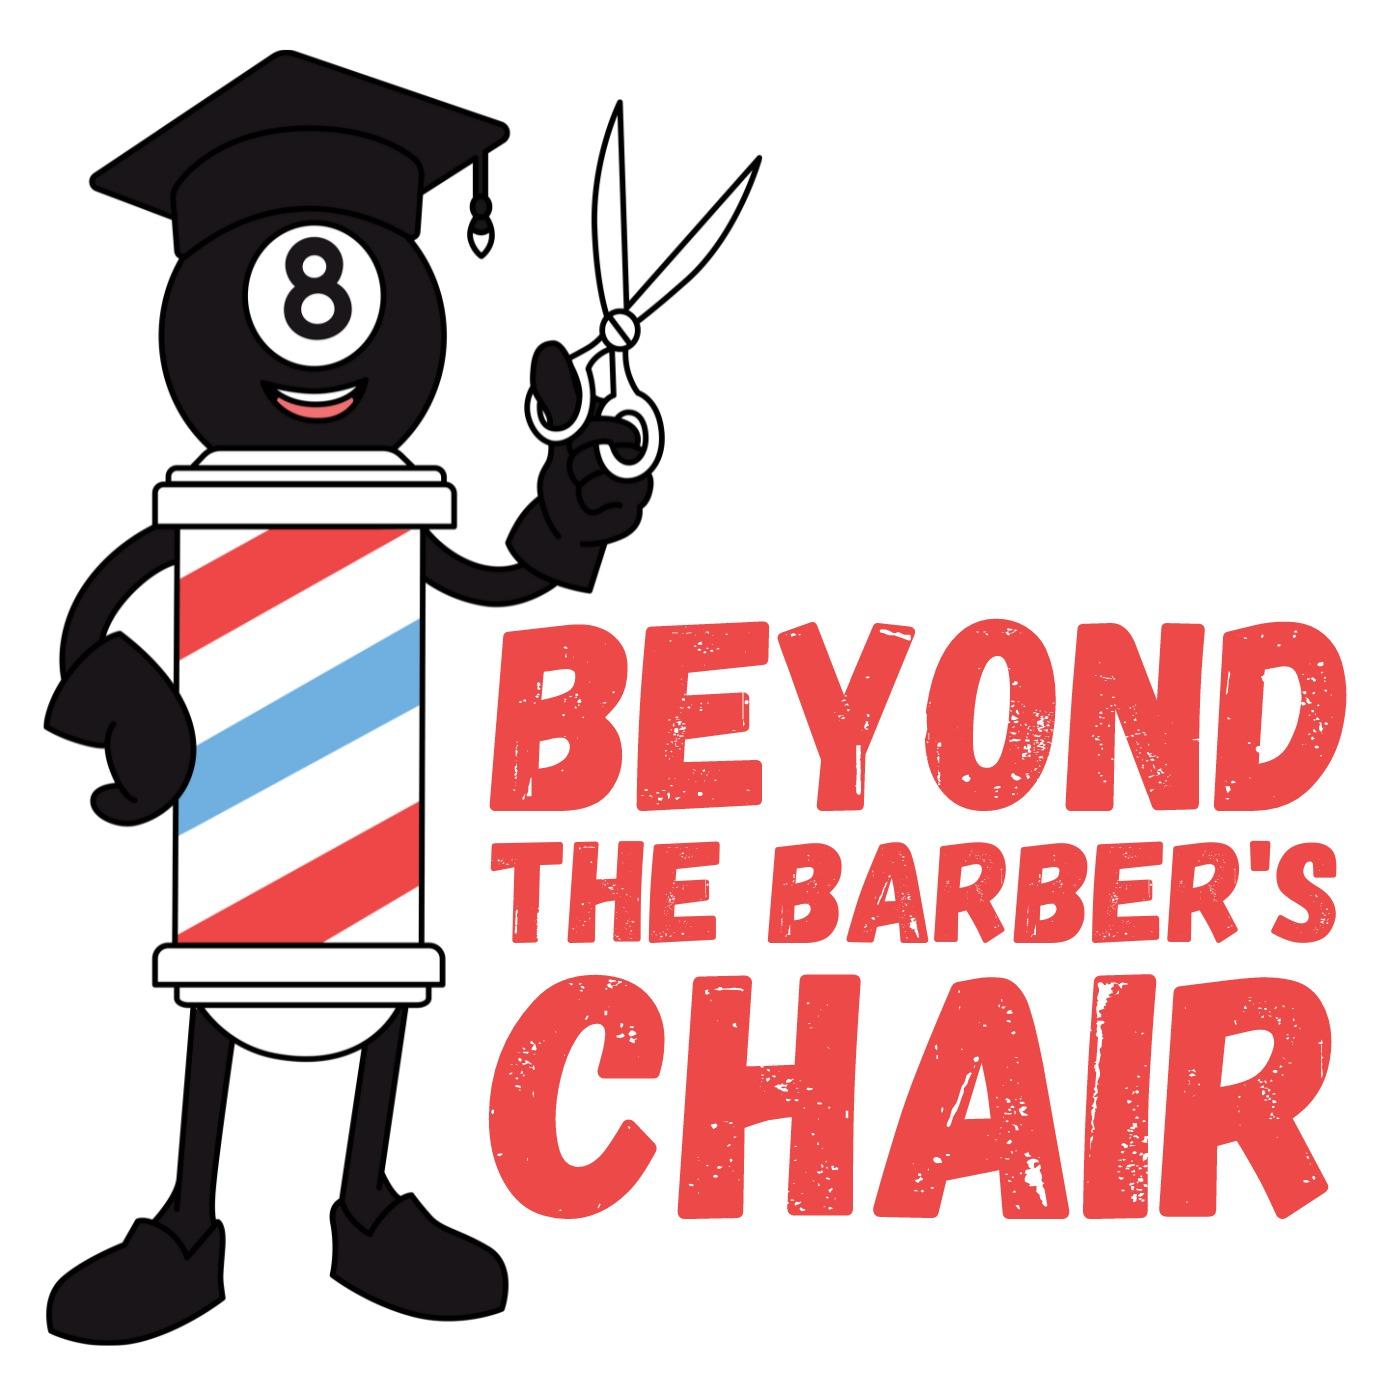 Beyond the Barber's Chair